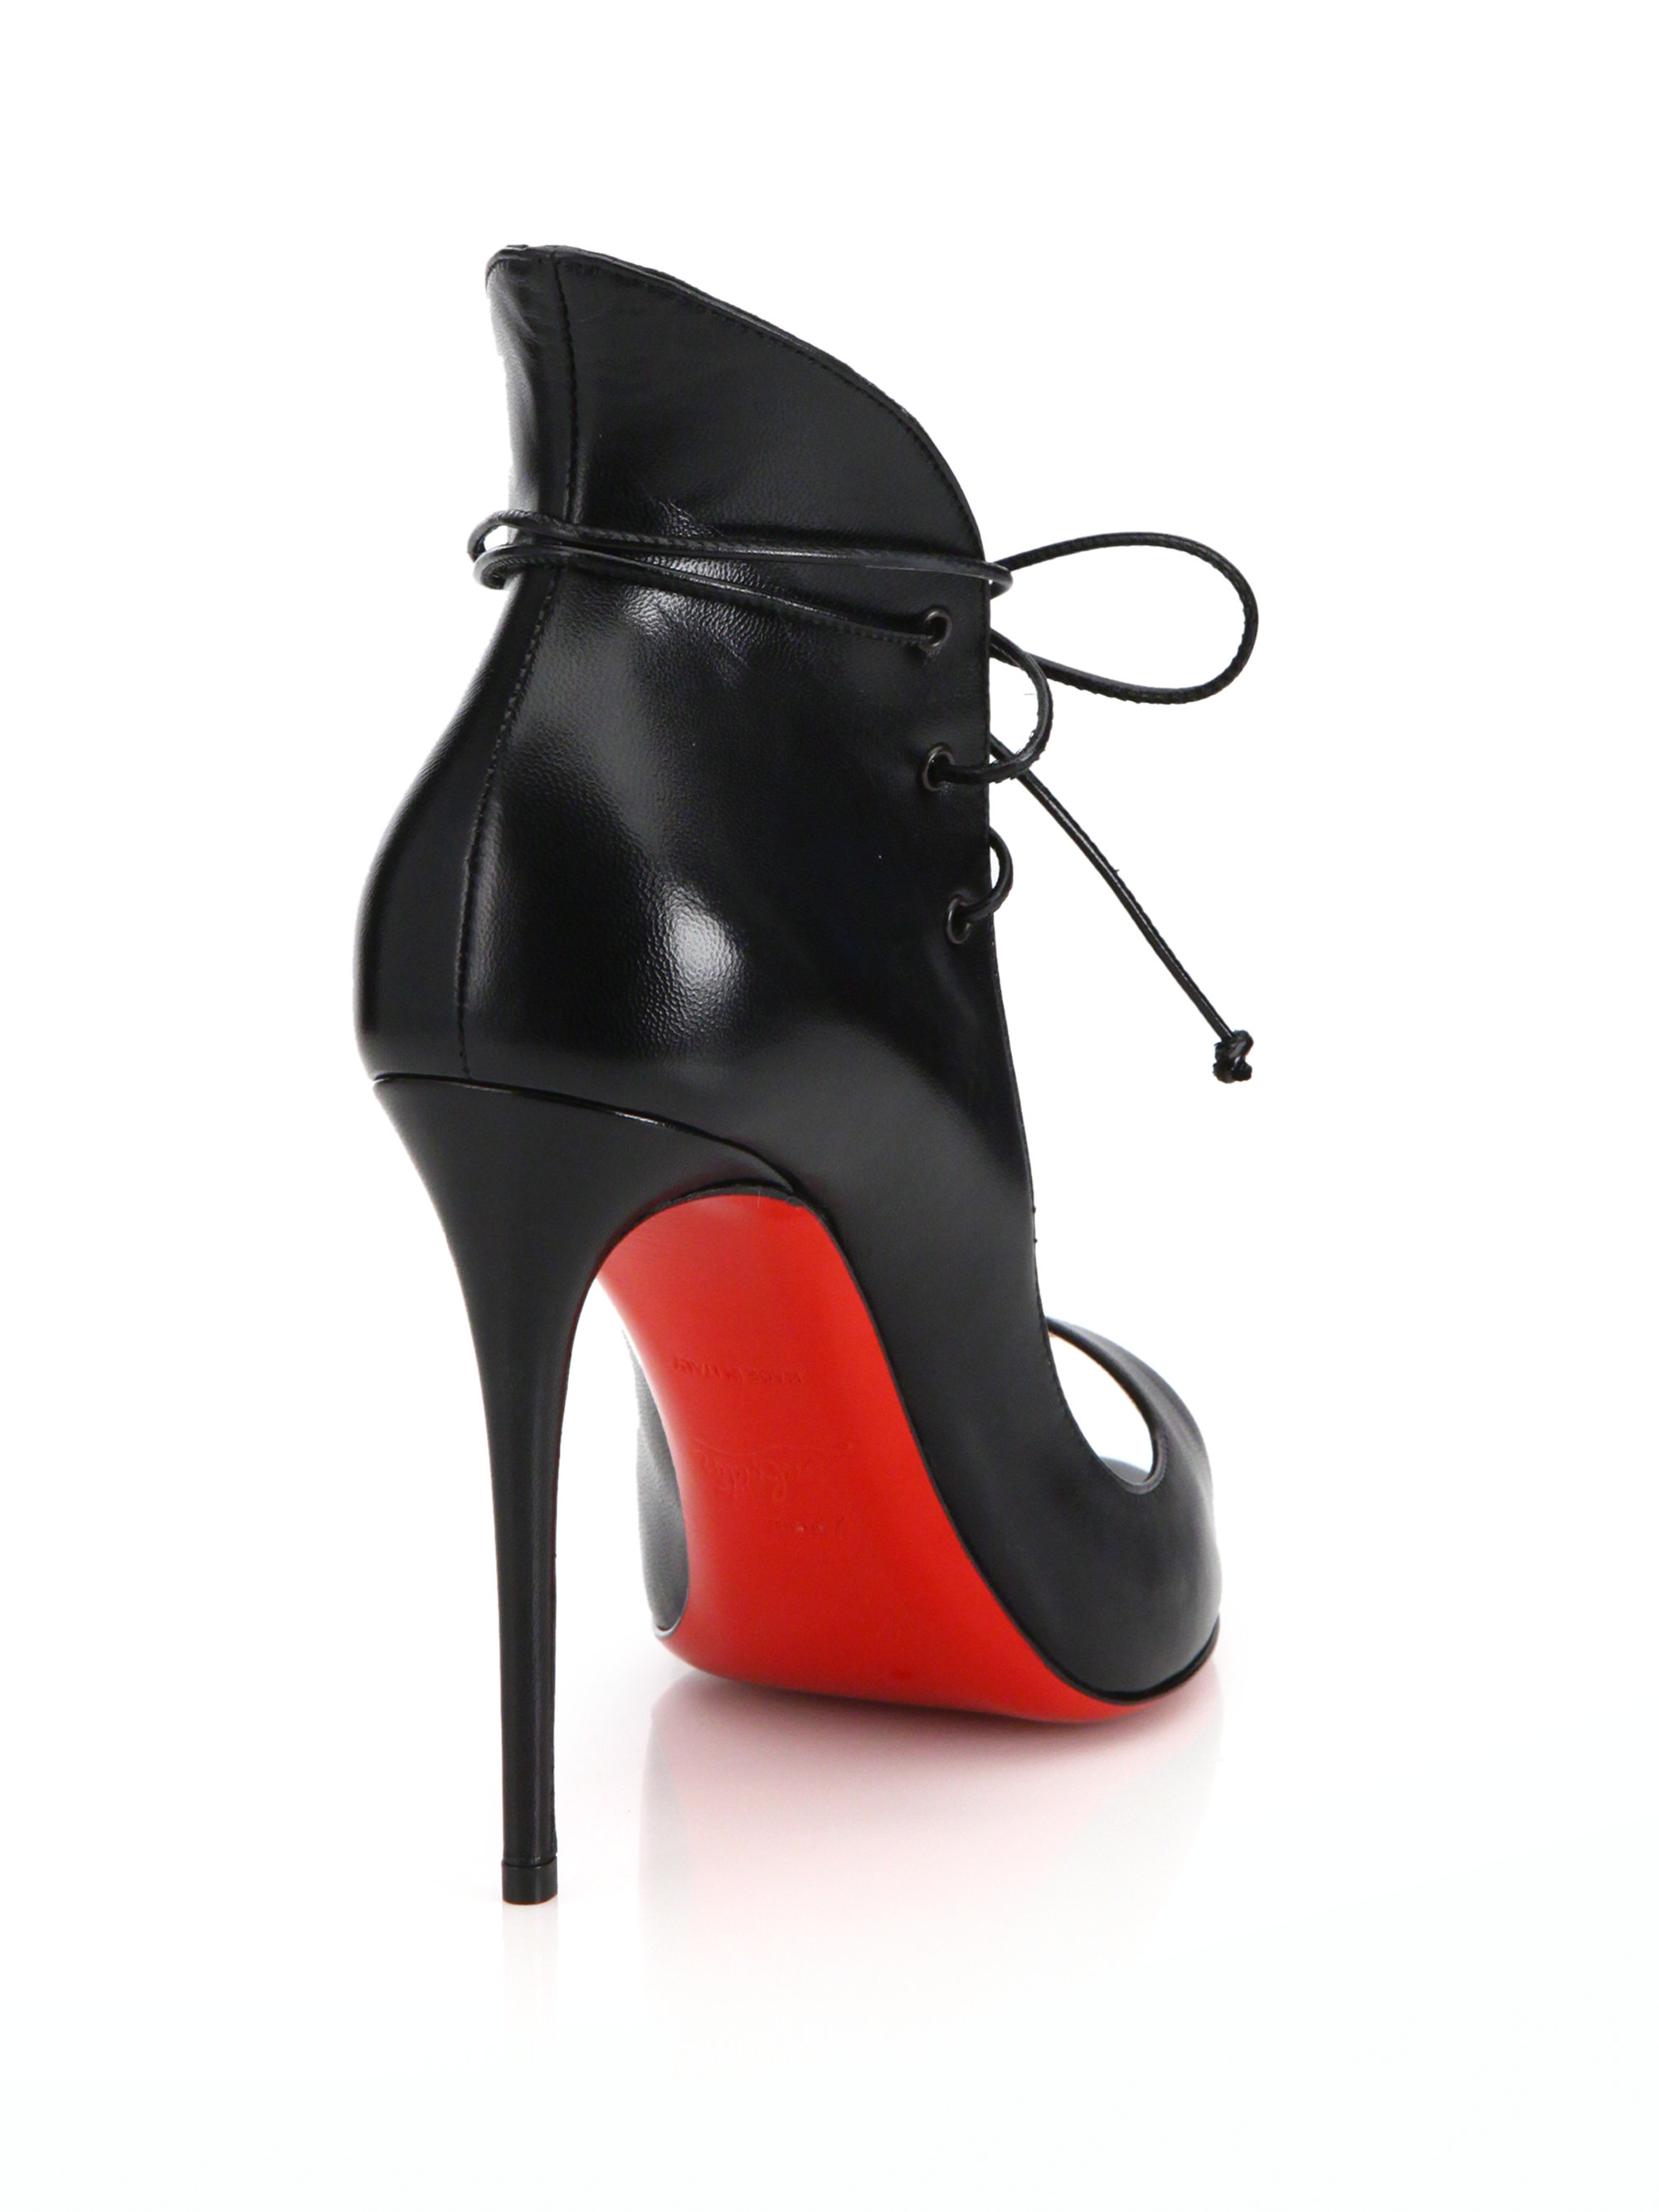 lou boutin shoes - Christian louboutin Megavamp Lace-Up Leather Sandals in Black | Lyst